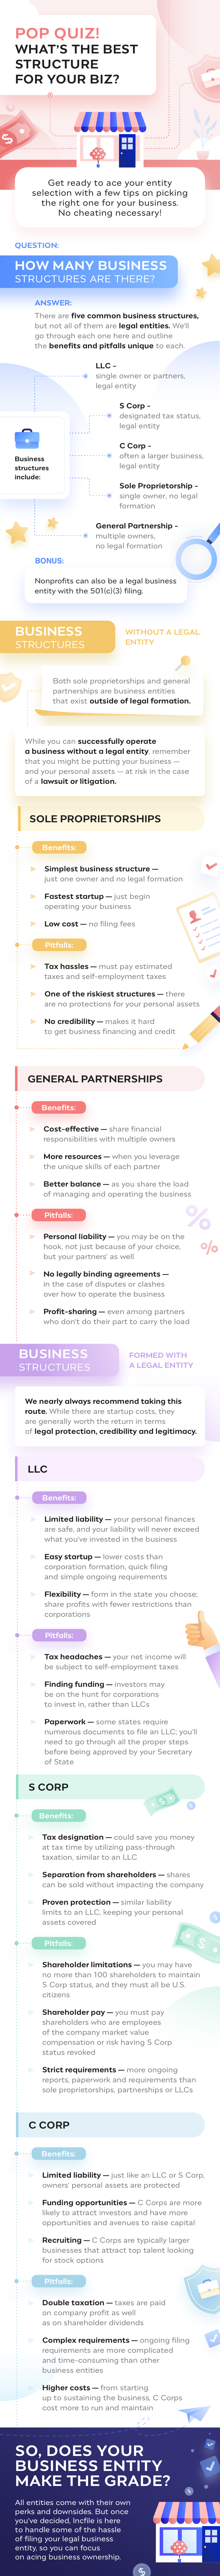 choosing entity business structure